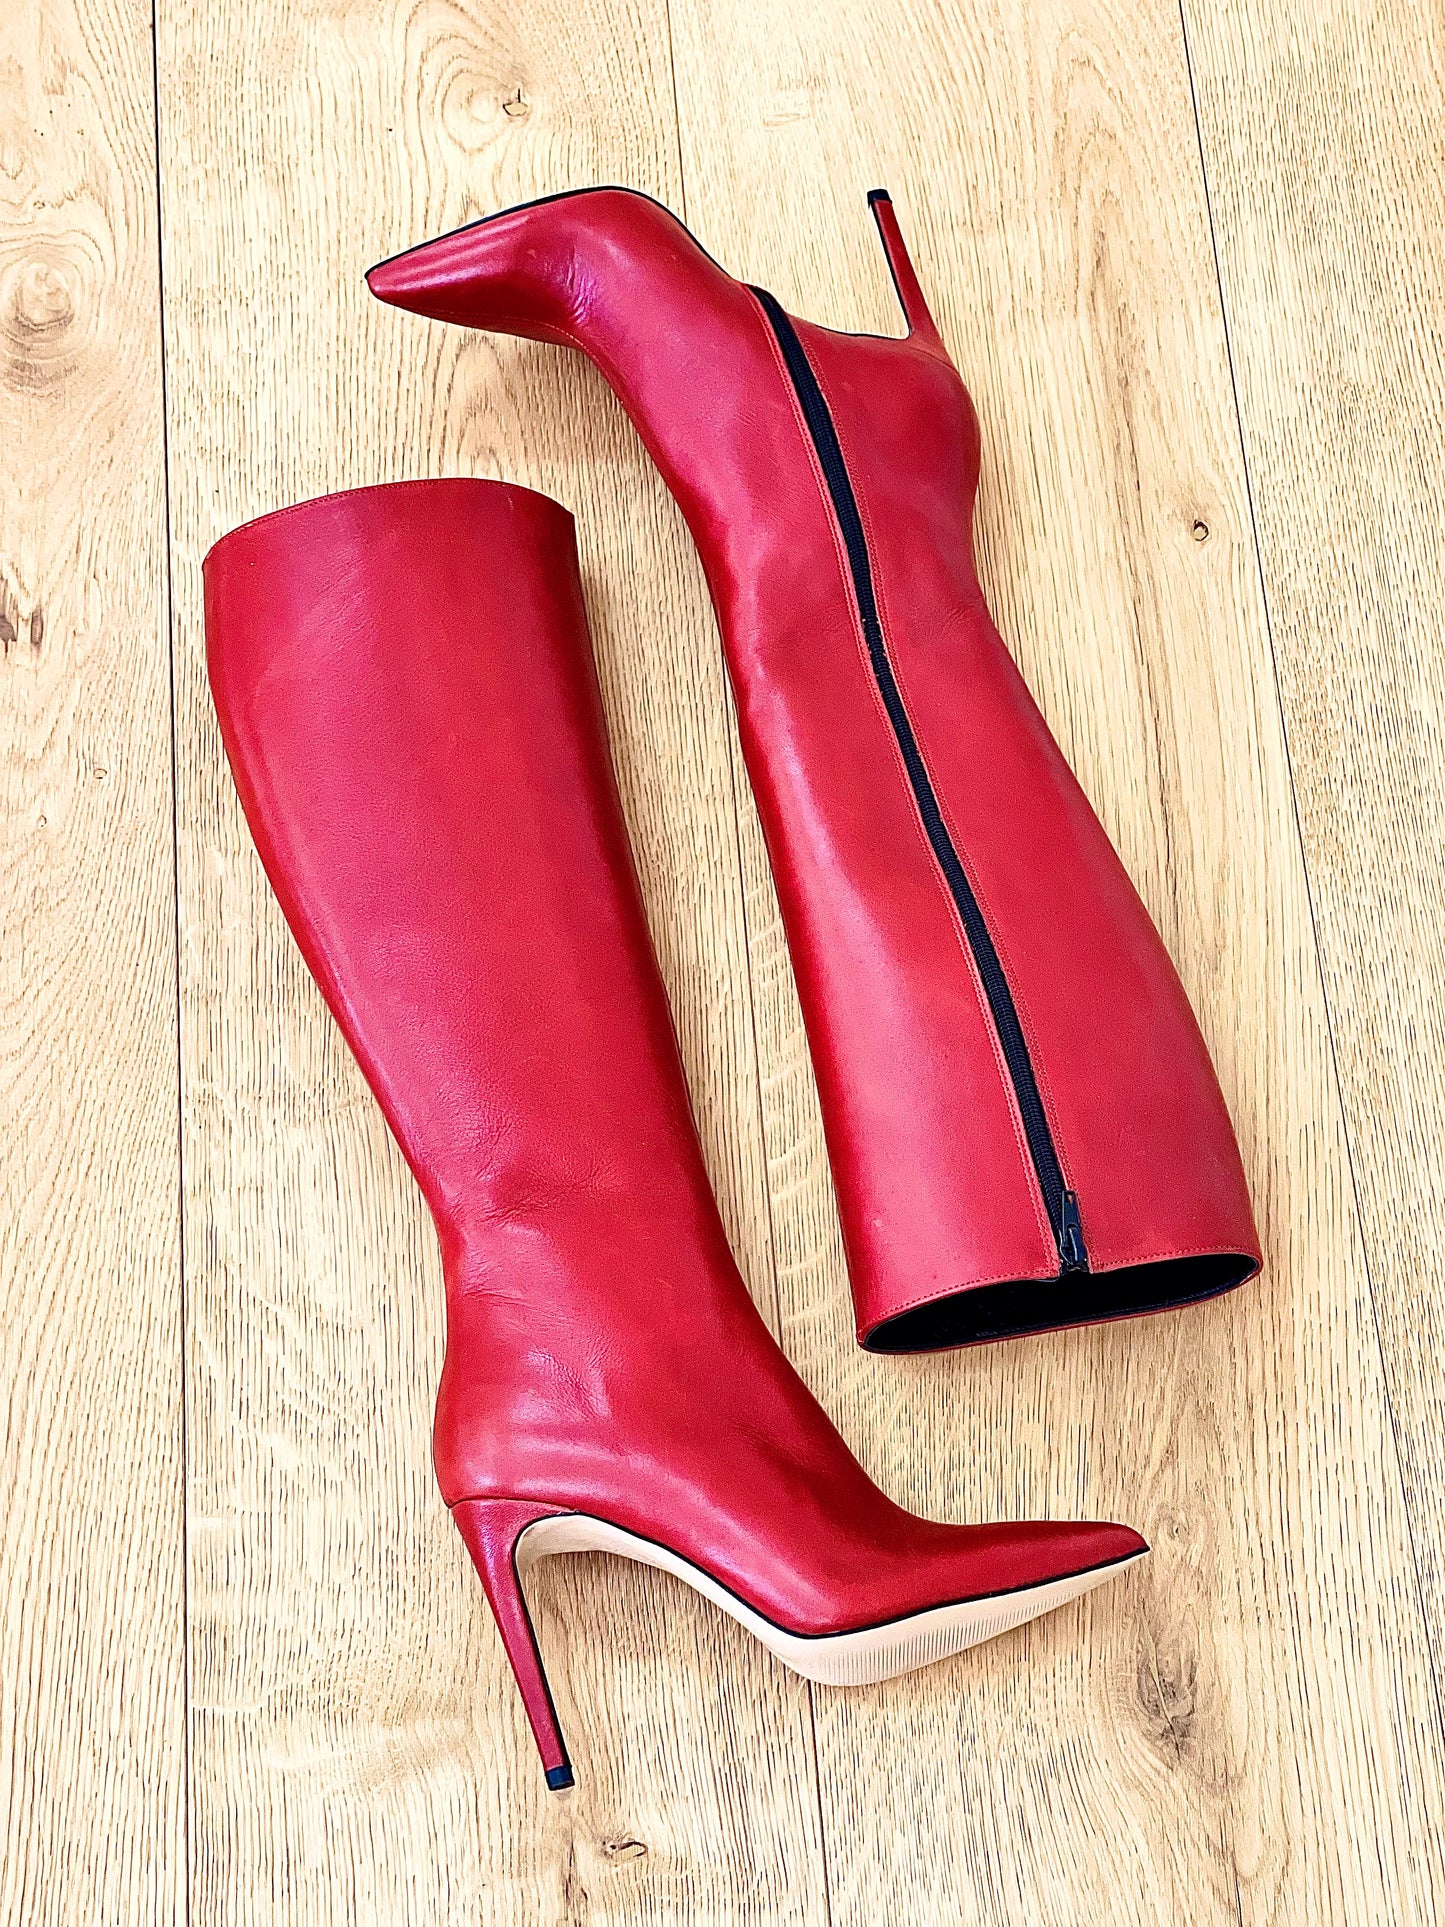 KELLY LEATHER RED